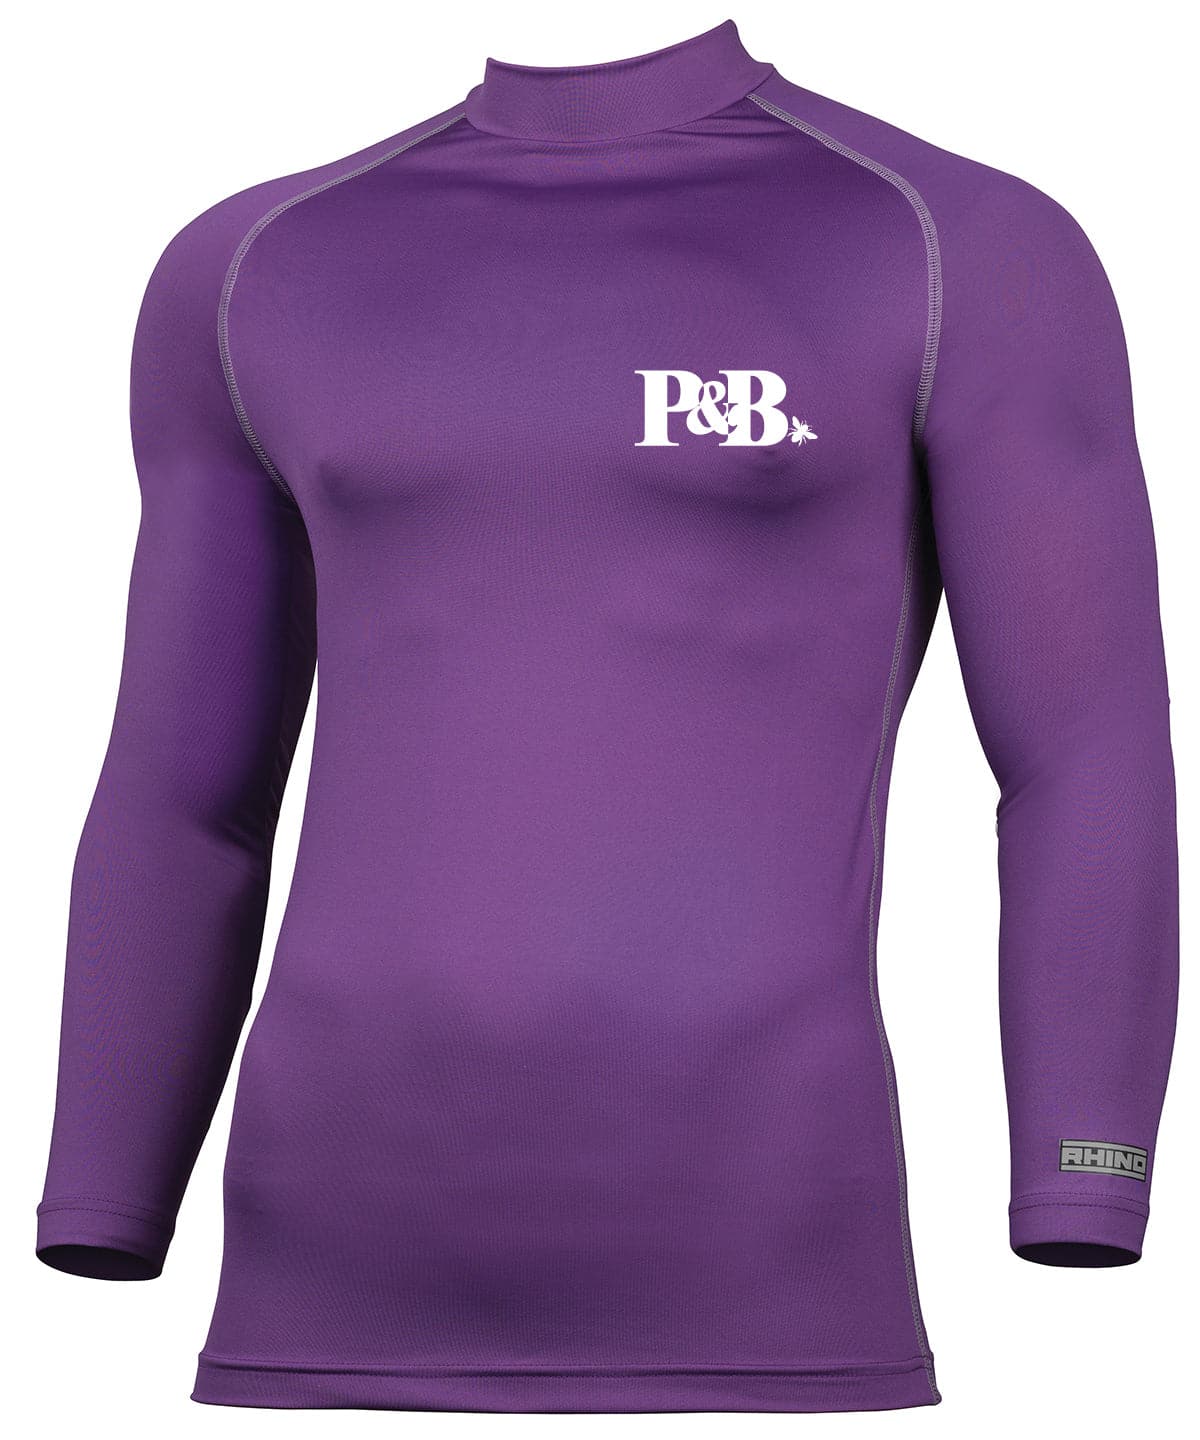 BEE YOU - Personalised Unisex Technical Base Layer